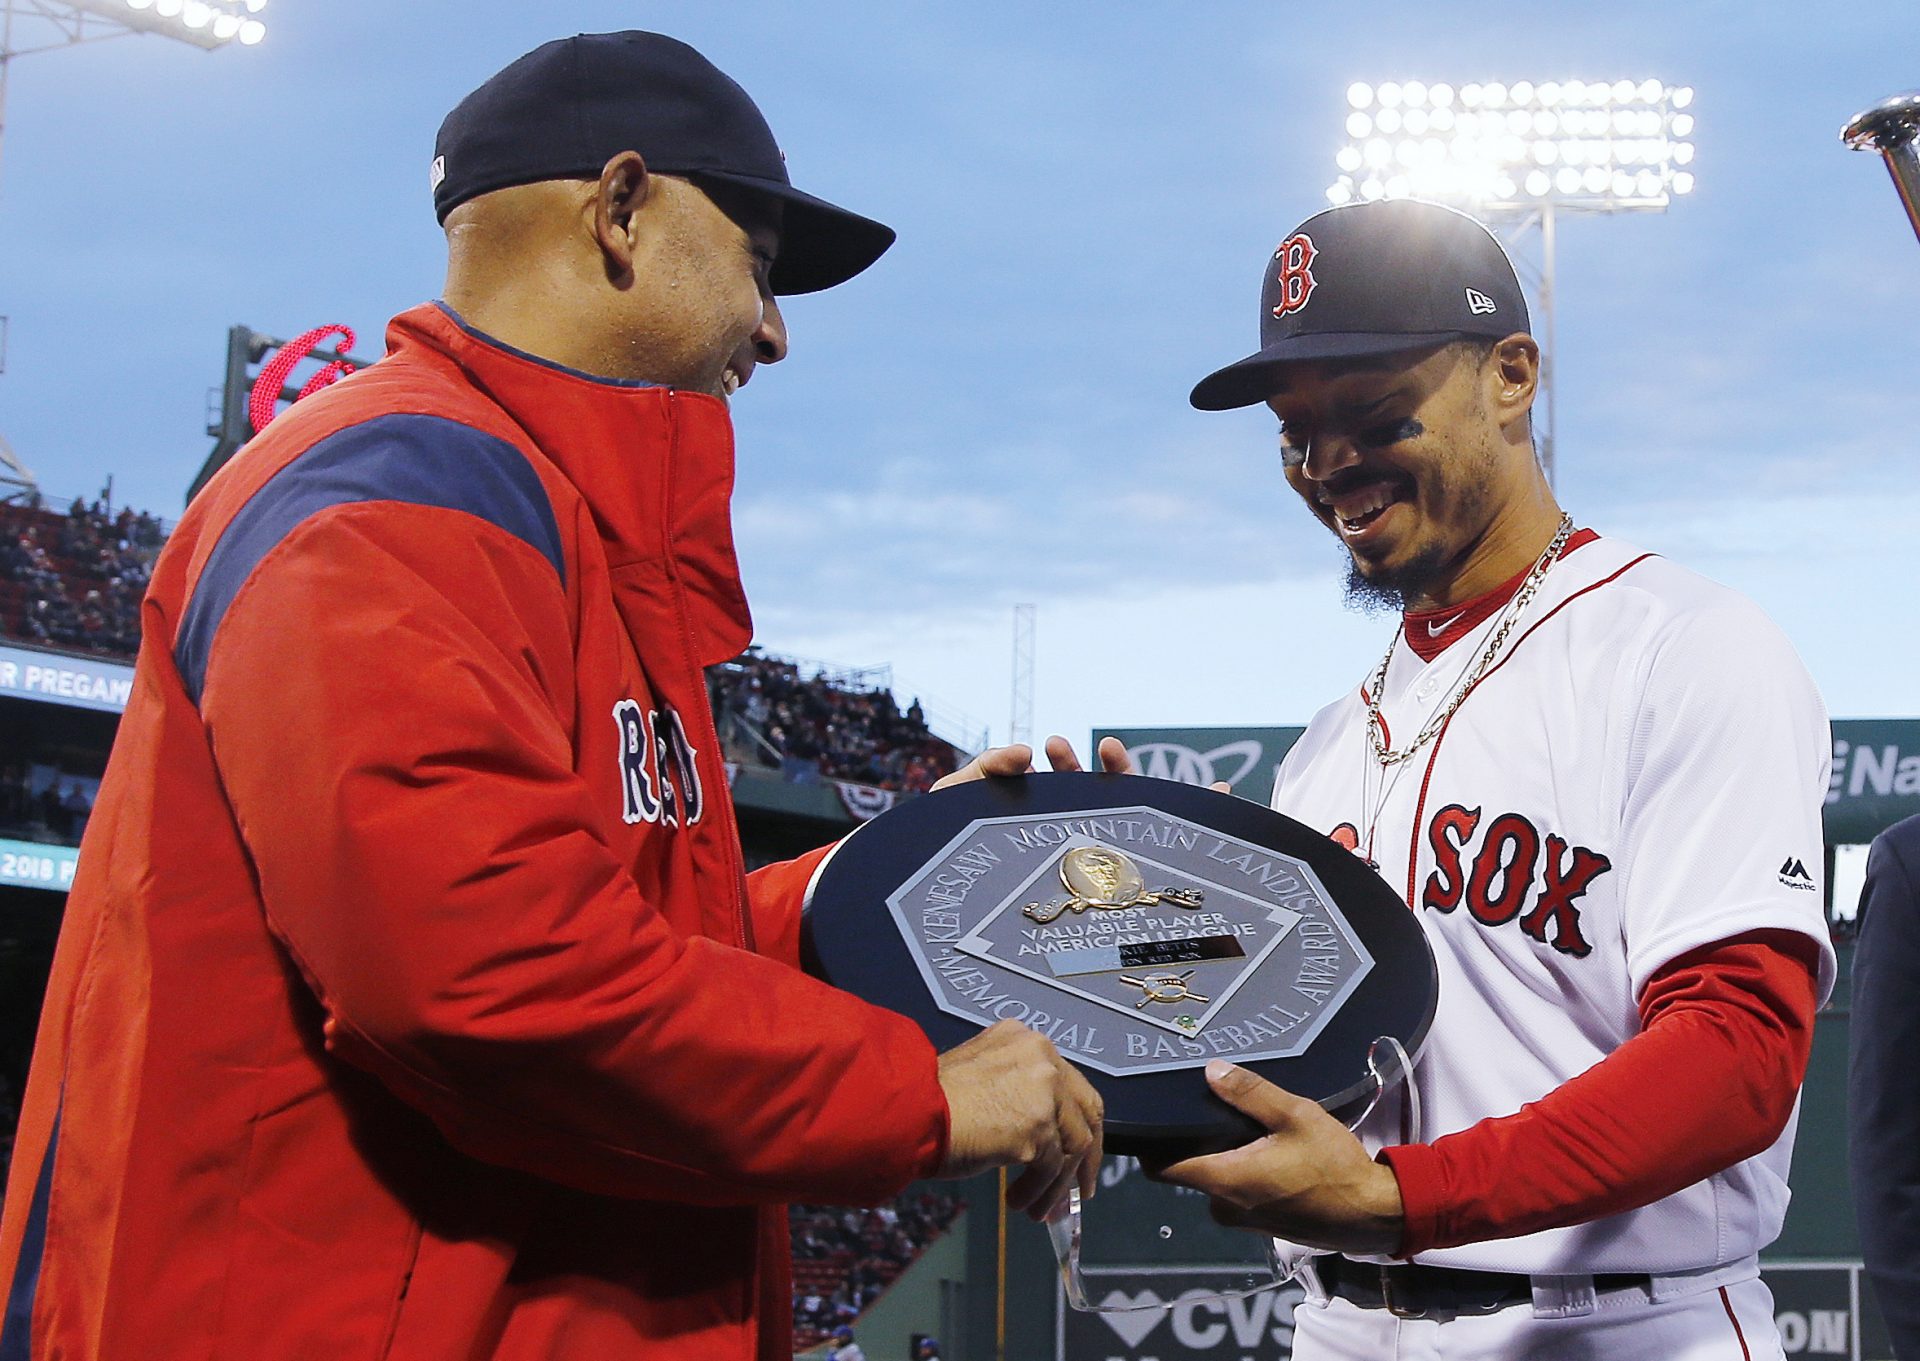 FILE - In this April 11, 2019, file photo, Boston Red Sox manager Alex Cora, left, presents right fielder Mookie Betts with the 2018 AL MVP Award before a baseball game between the Red Sox and the Toronto Blue Jays at Fenway Park in Boston. The award includes the name and image of Kenesaw Mountain Landis.